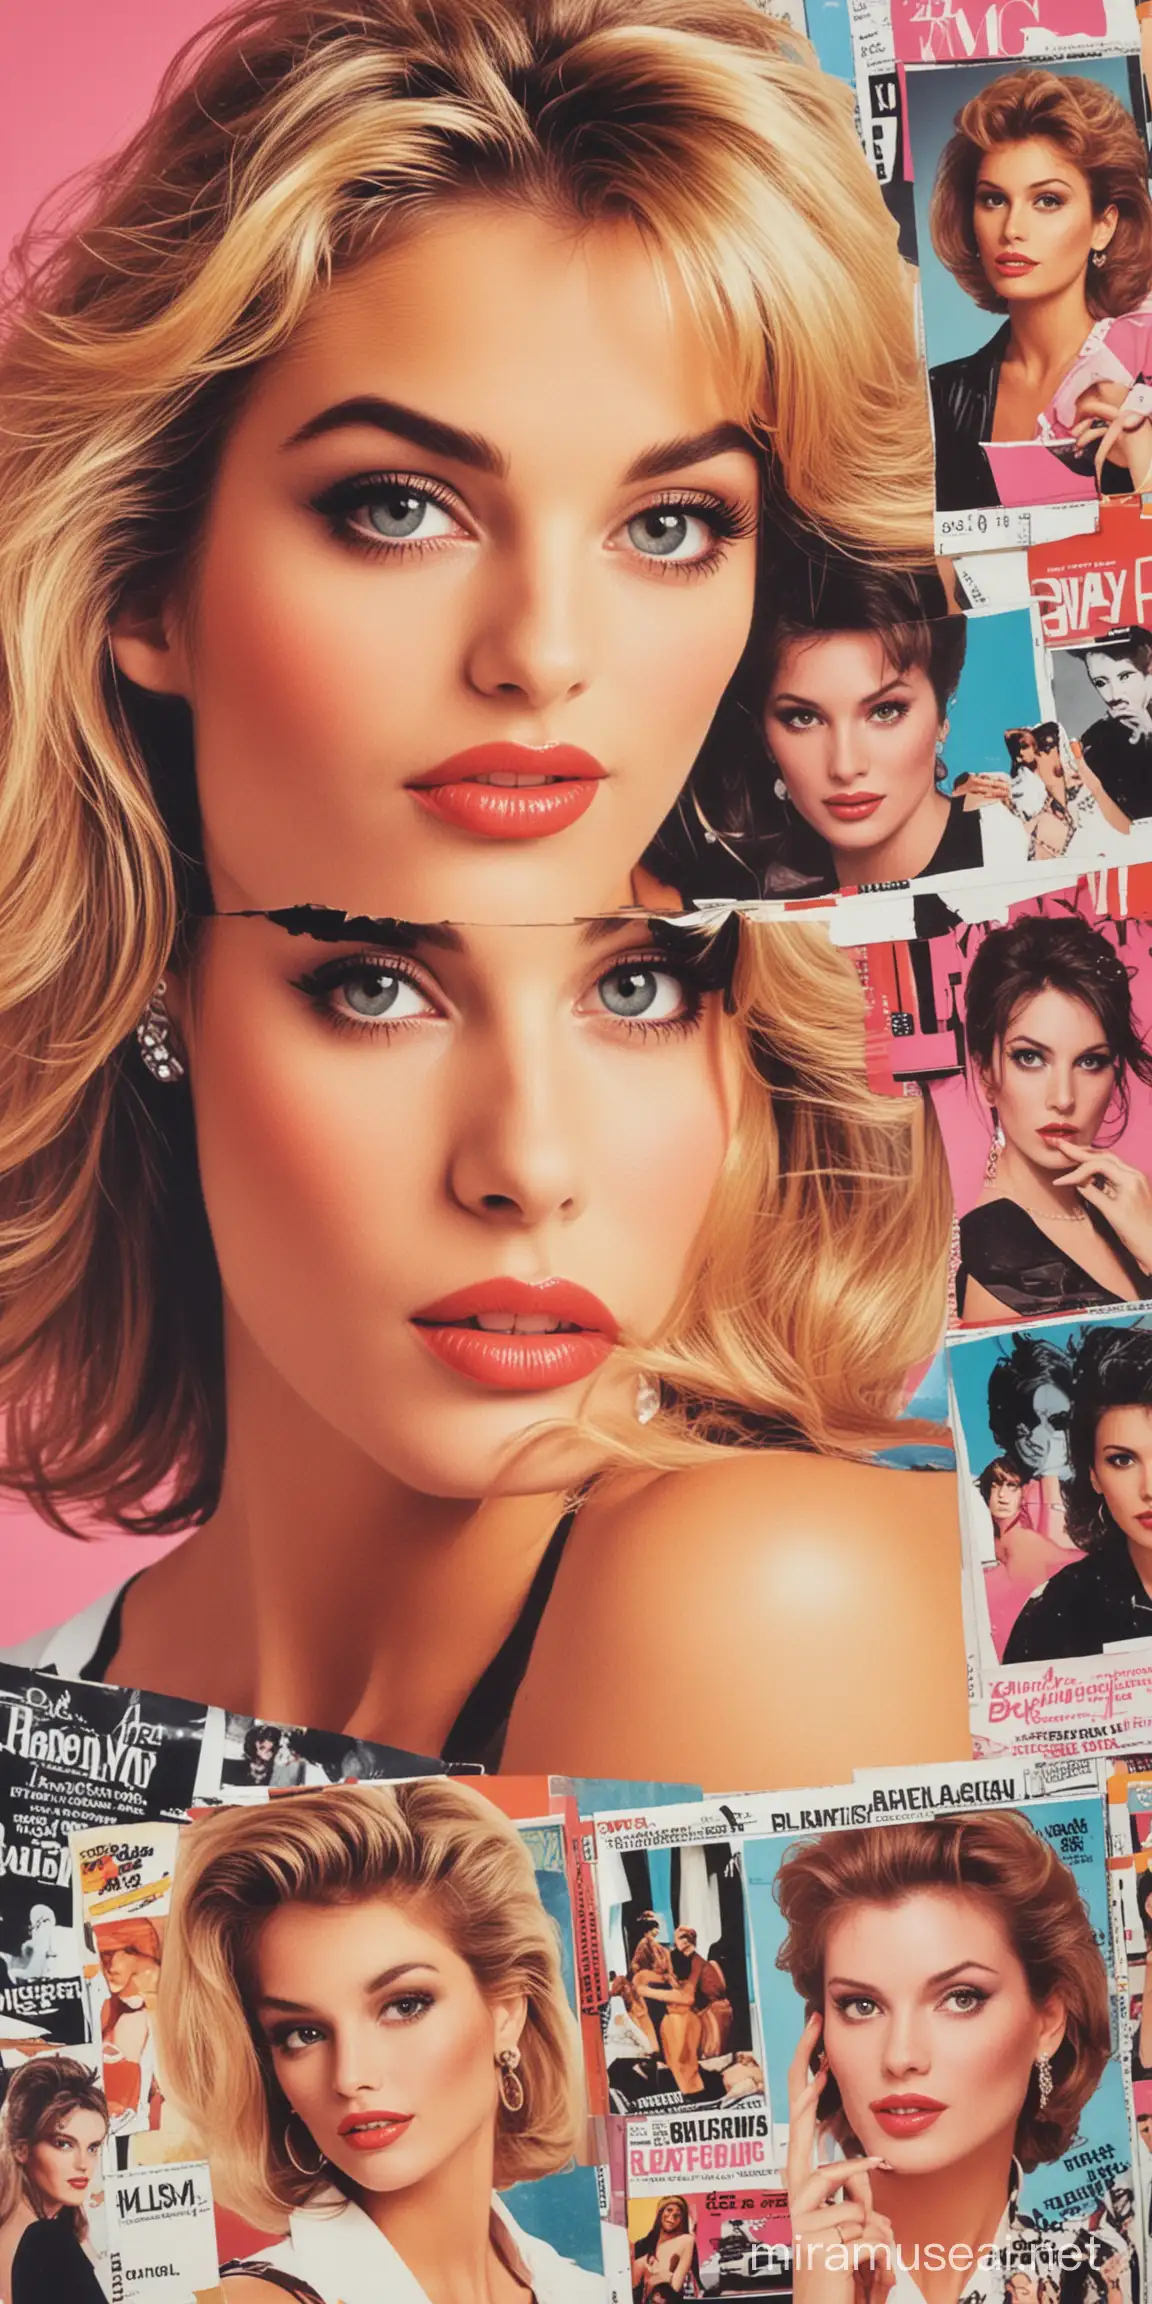 collage, of pretty woman, 80's pop art style, magazine cover